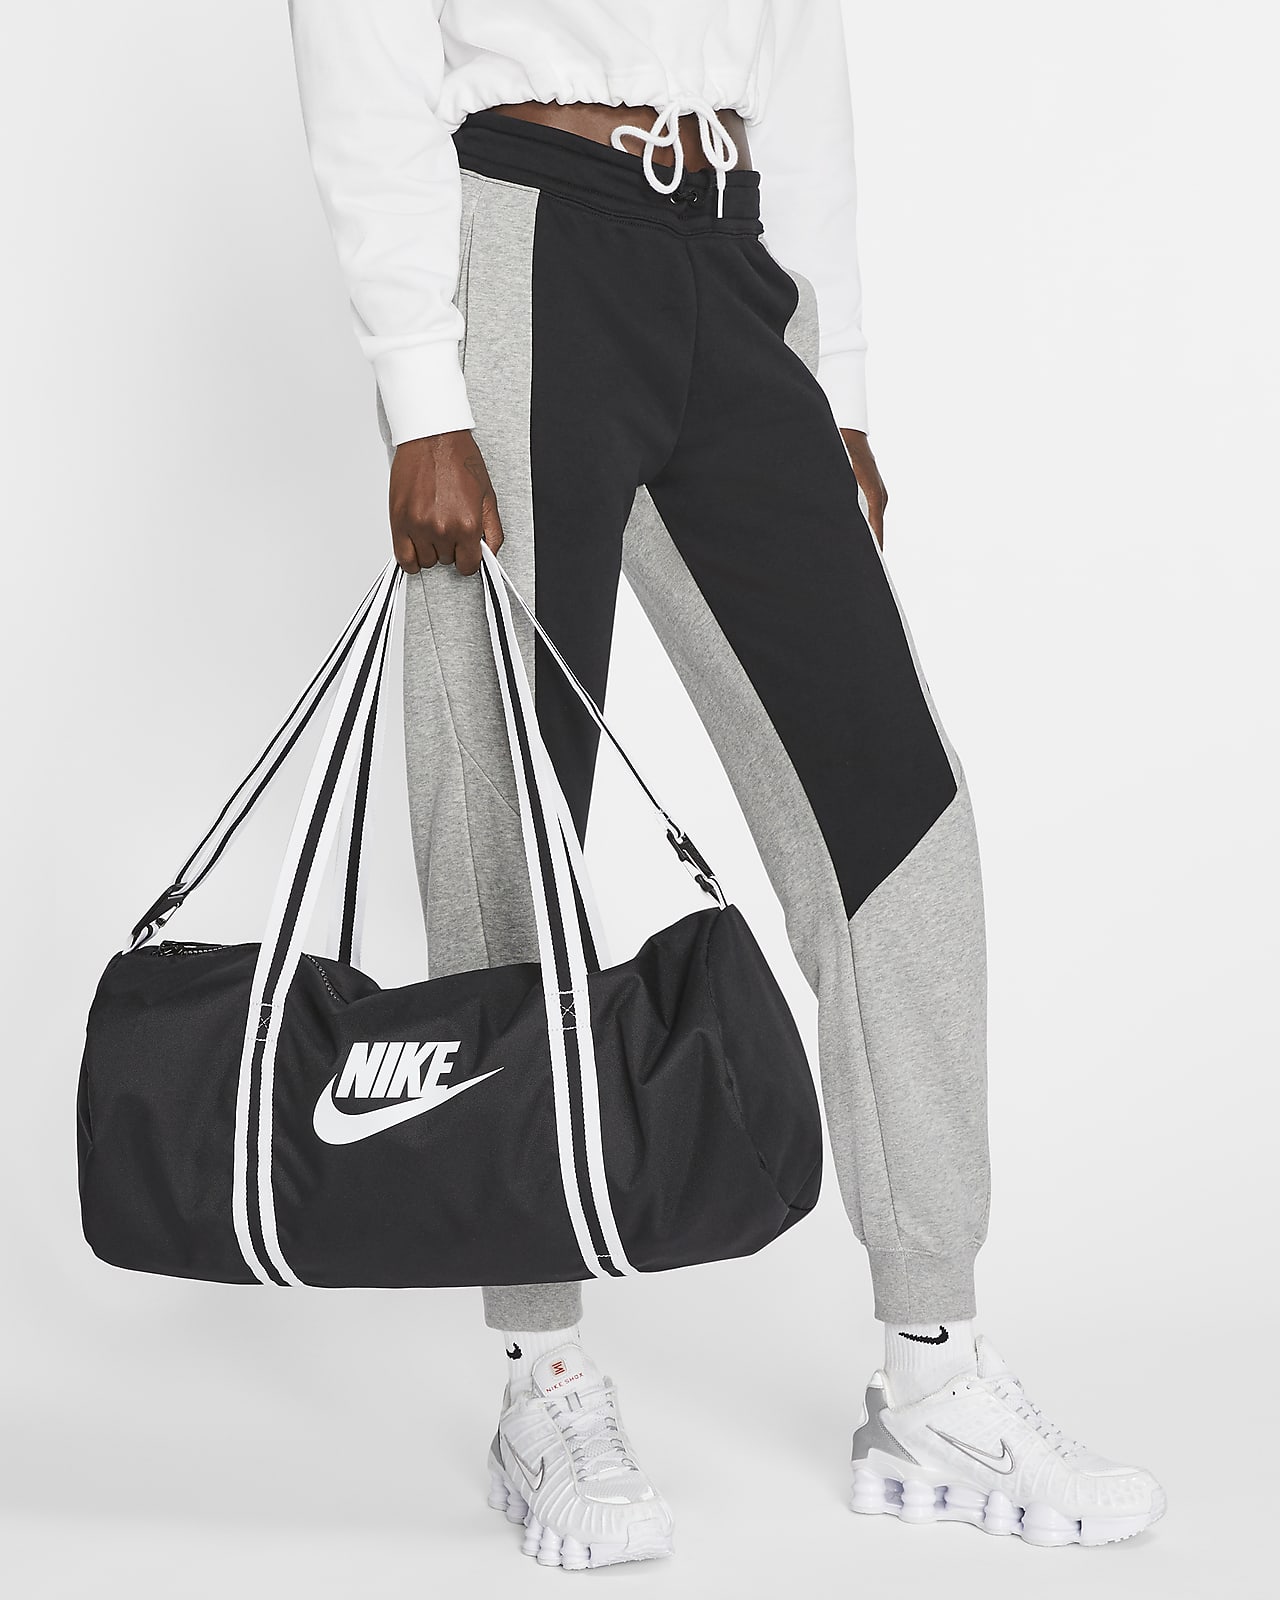 nike limited edition bags